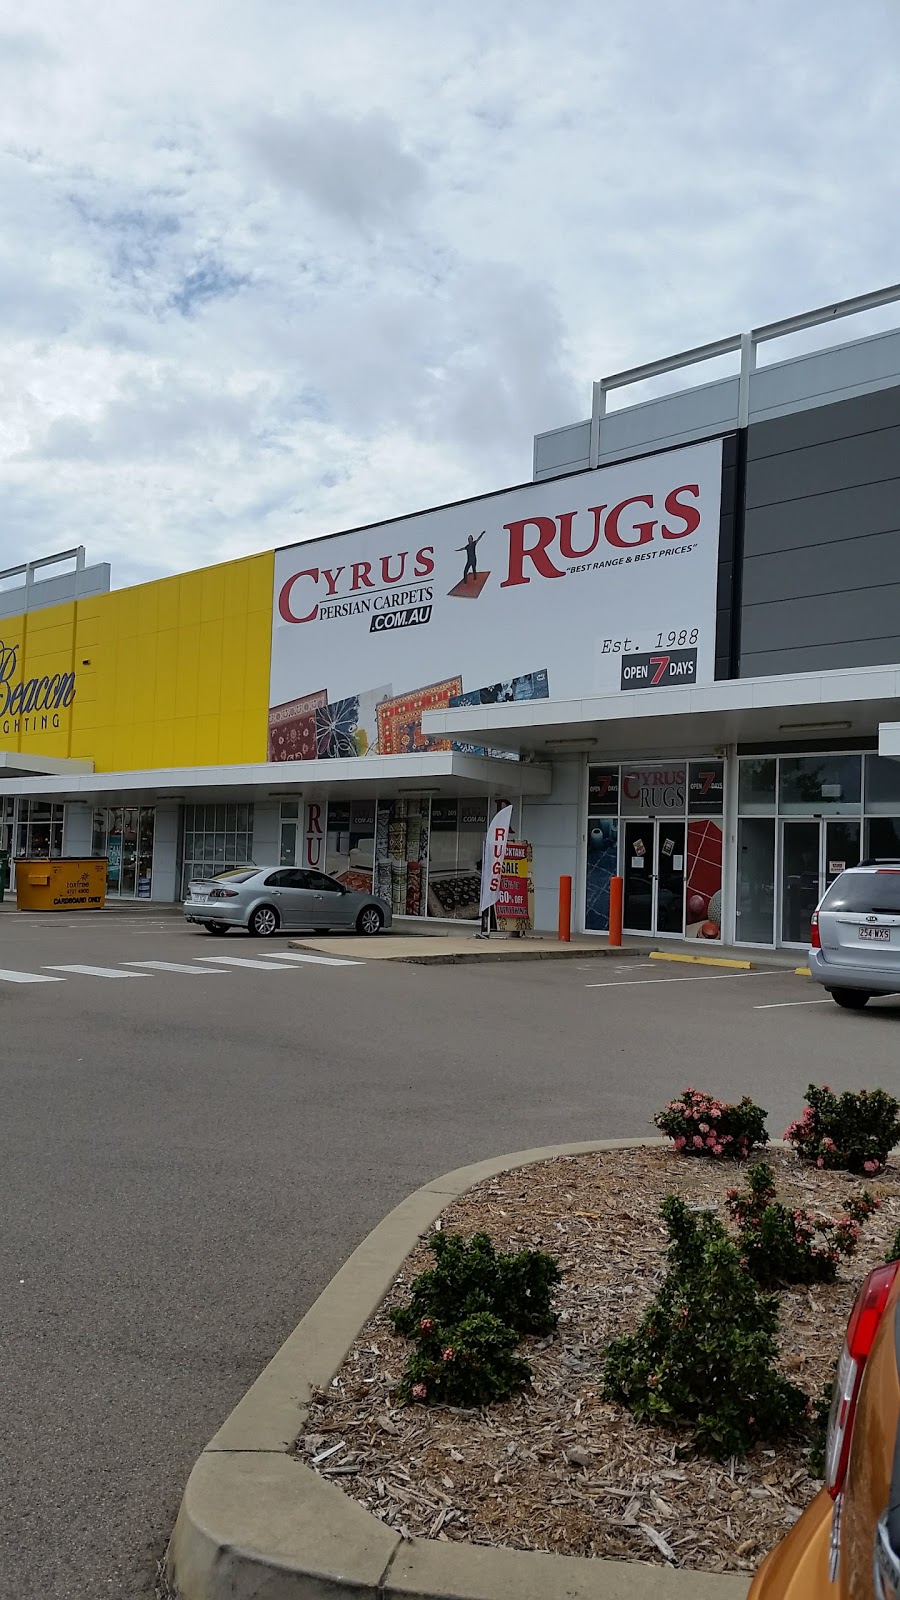 Cyrus Persian Carpets & Rugs Townsville | store | 5/157 Duckworth St, Garbutt QLD 4814, Australia | 0747791200 OR +61 7 4779 1200